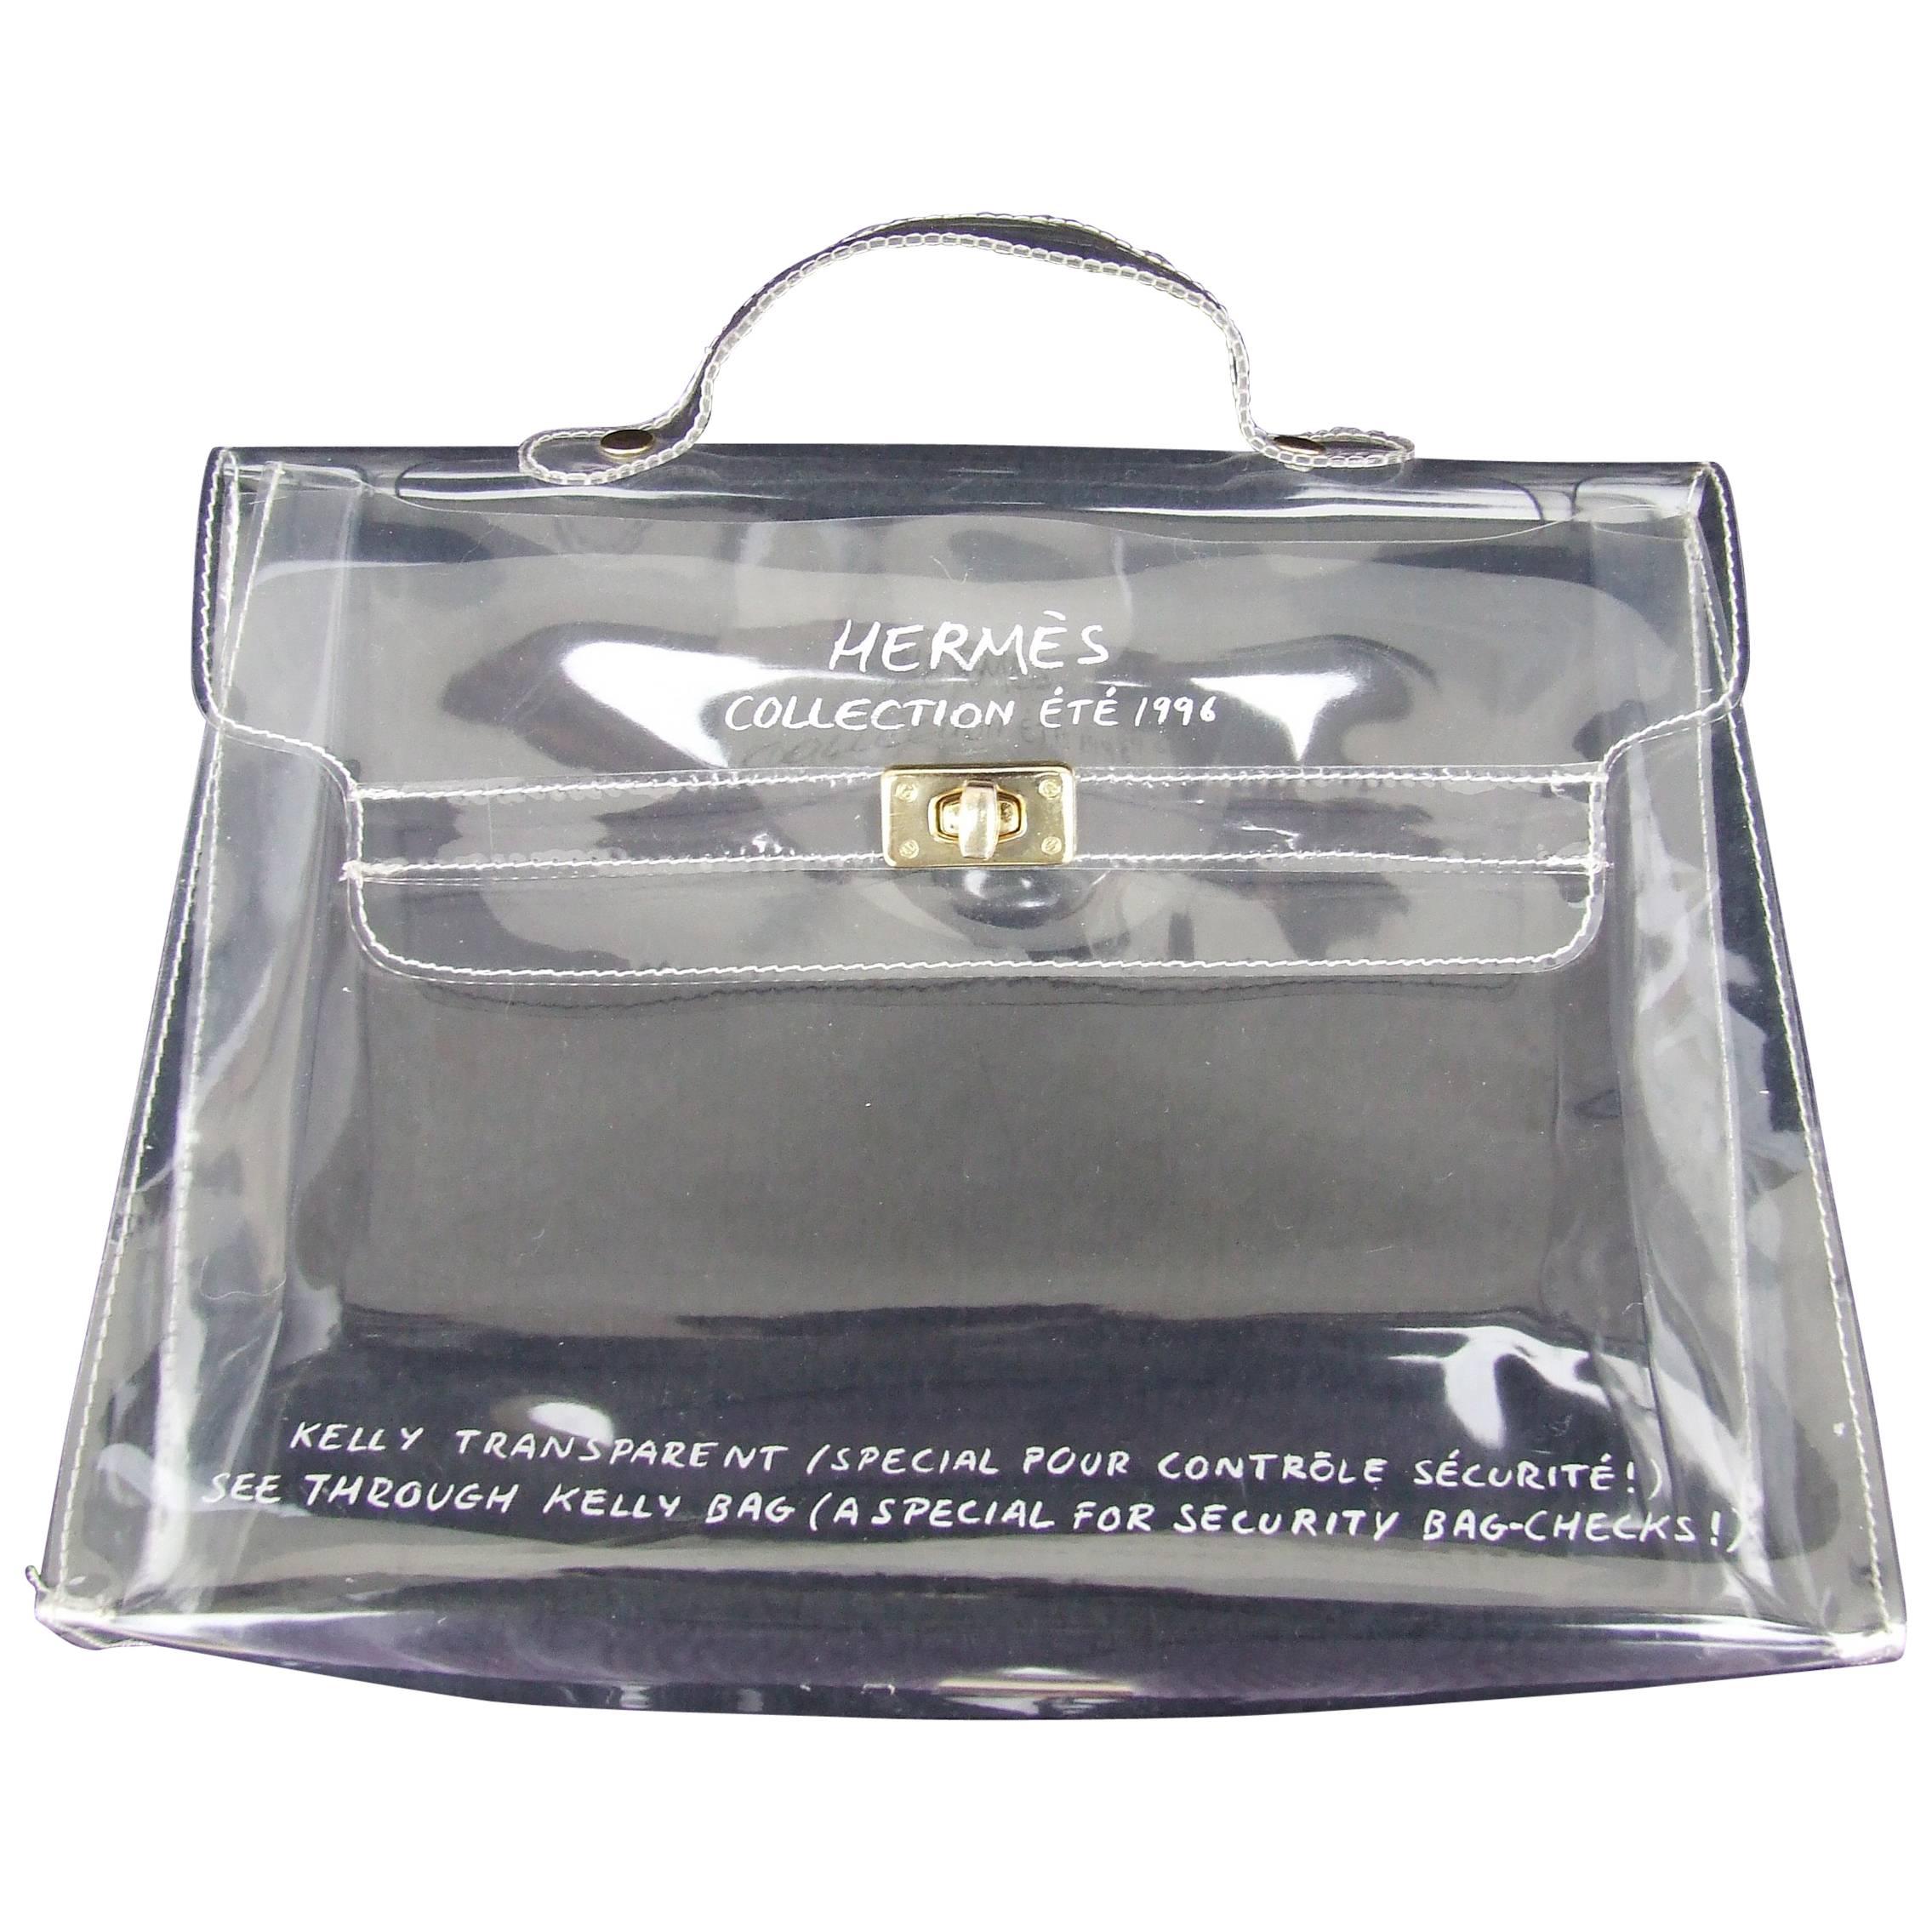 HERMES Collector See Through Kelly Bag Special Security Bag Check-in 1996 32 cm